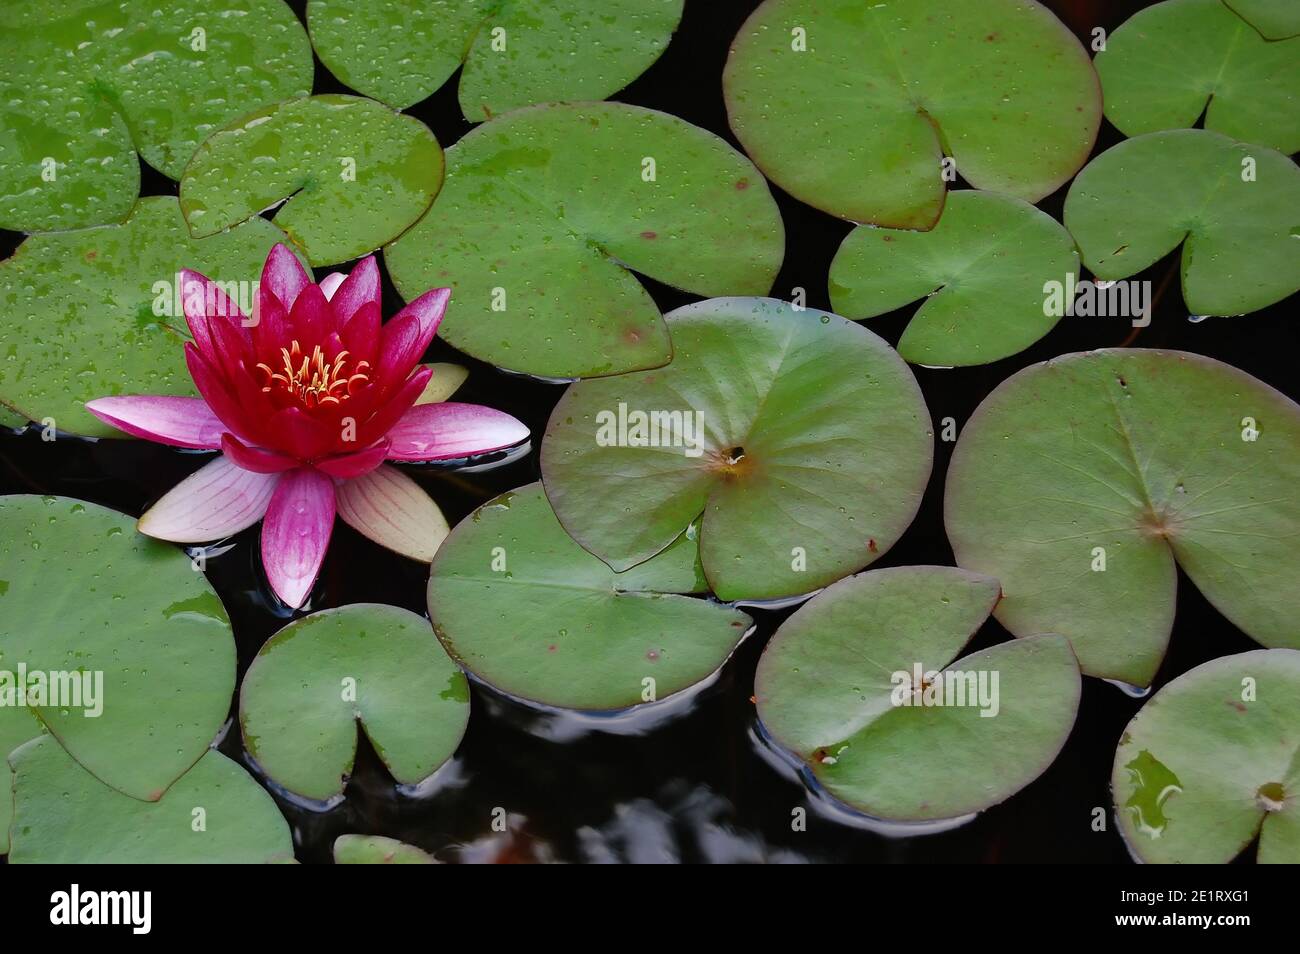 Colourful blooming waterlily (Latin name: nymphaea) with pink, rose and white petals and yellow center in a garden pond. Stock Photo